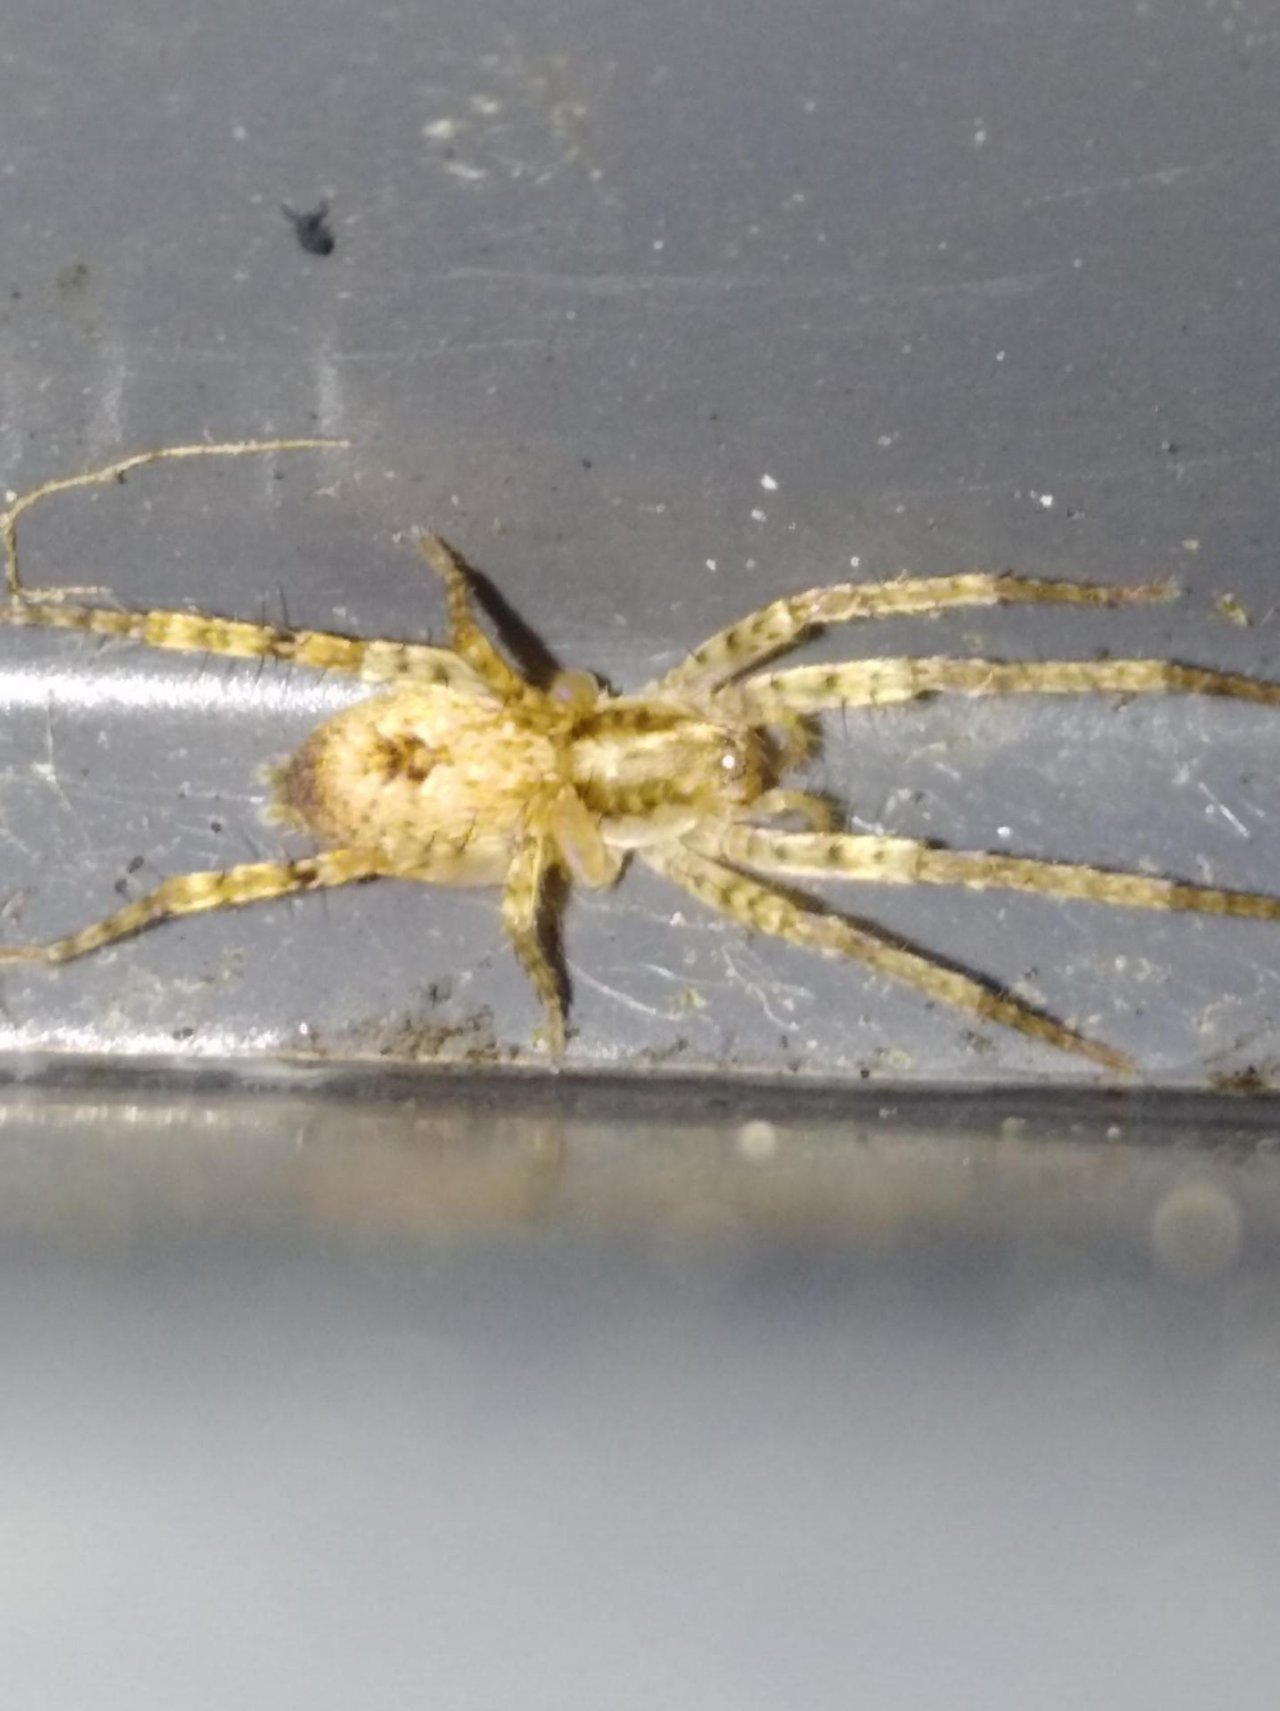 unknown species in SpiderSpotter App spotted by Sofie Hermans on 13.12.2020